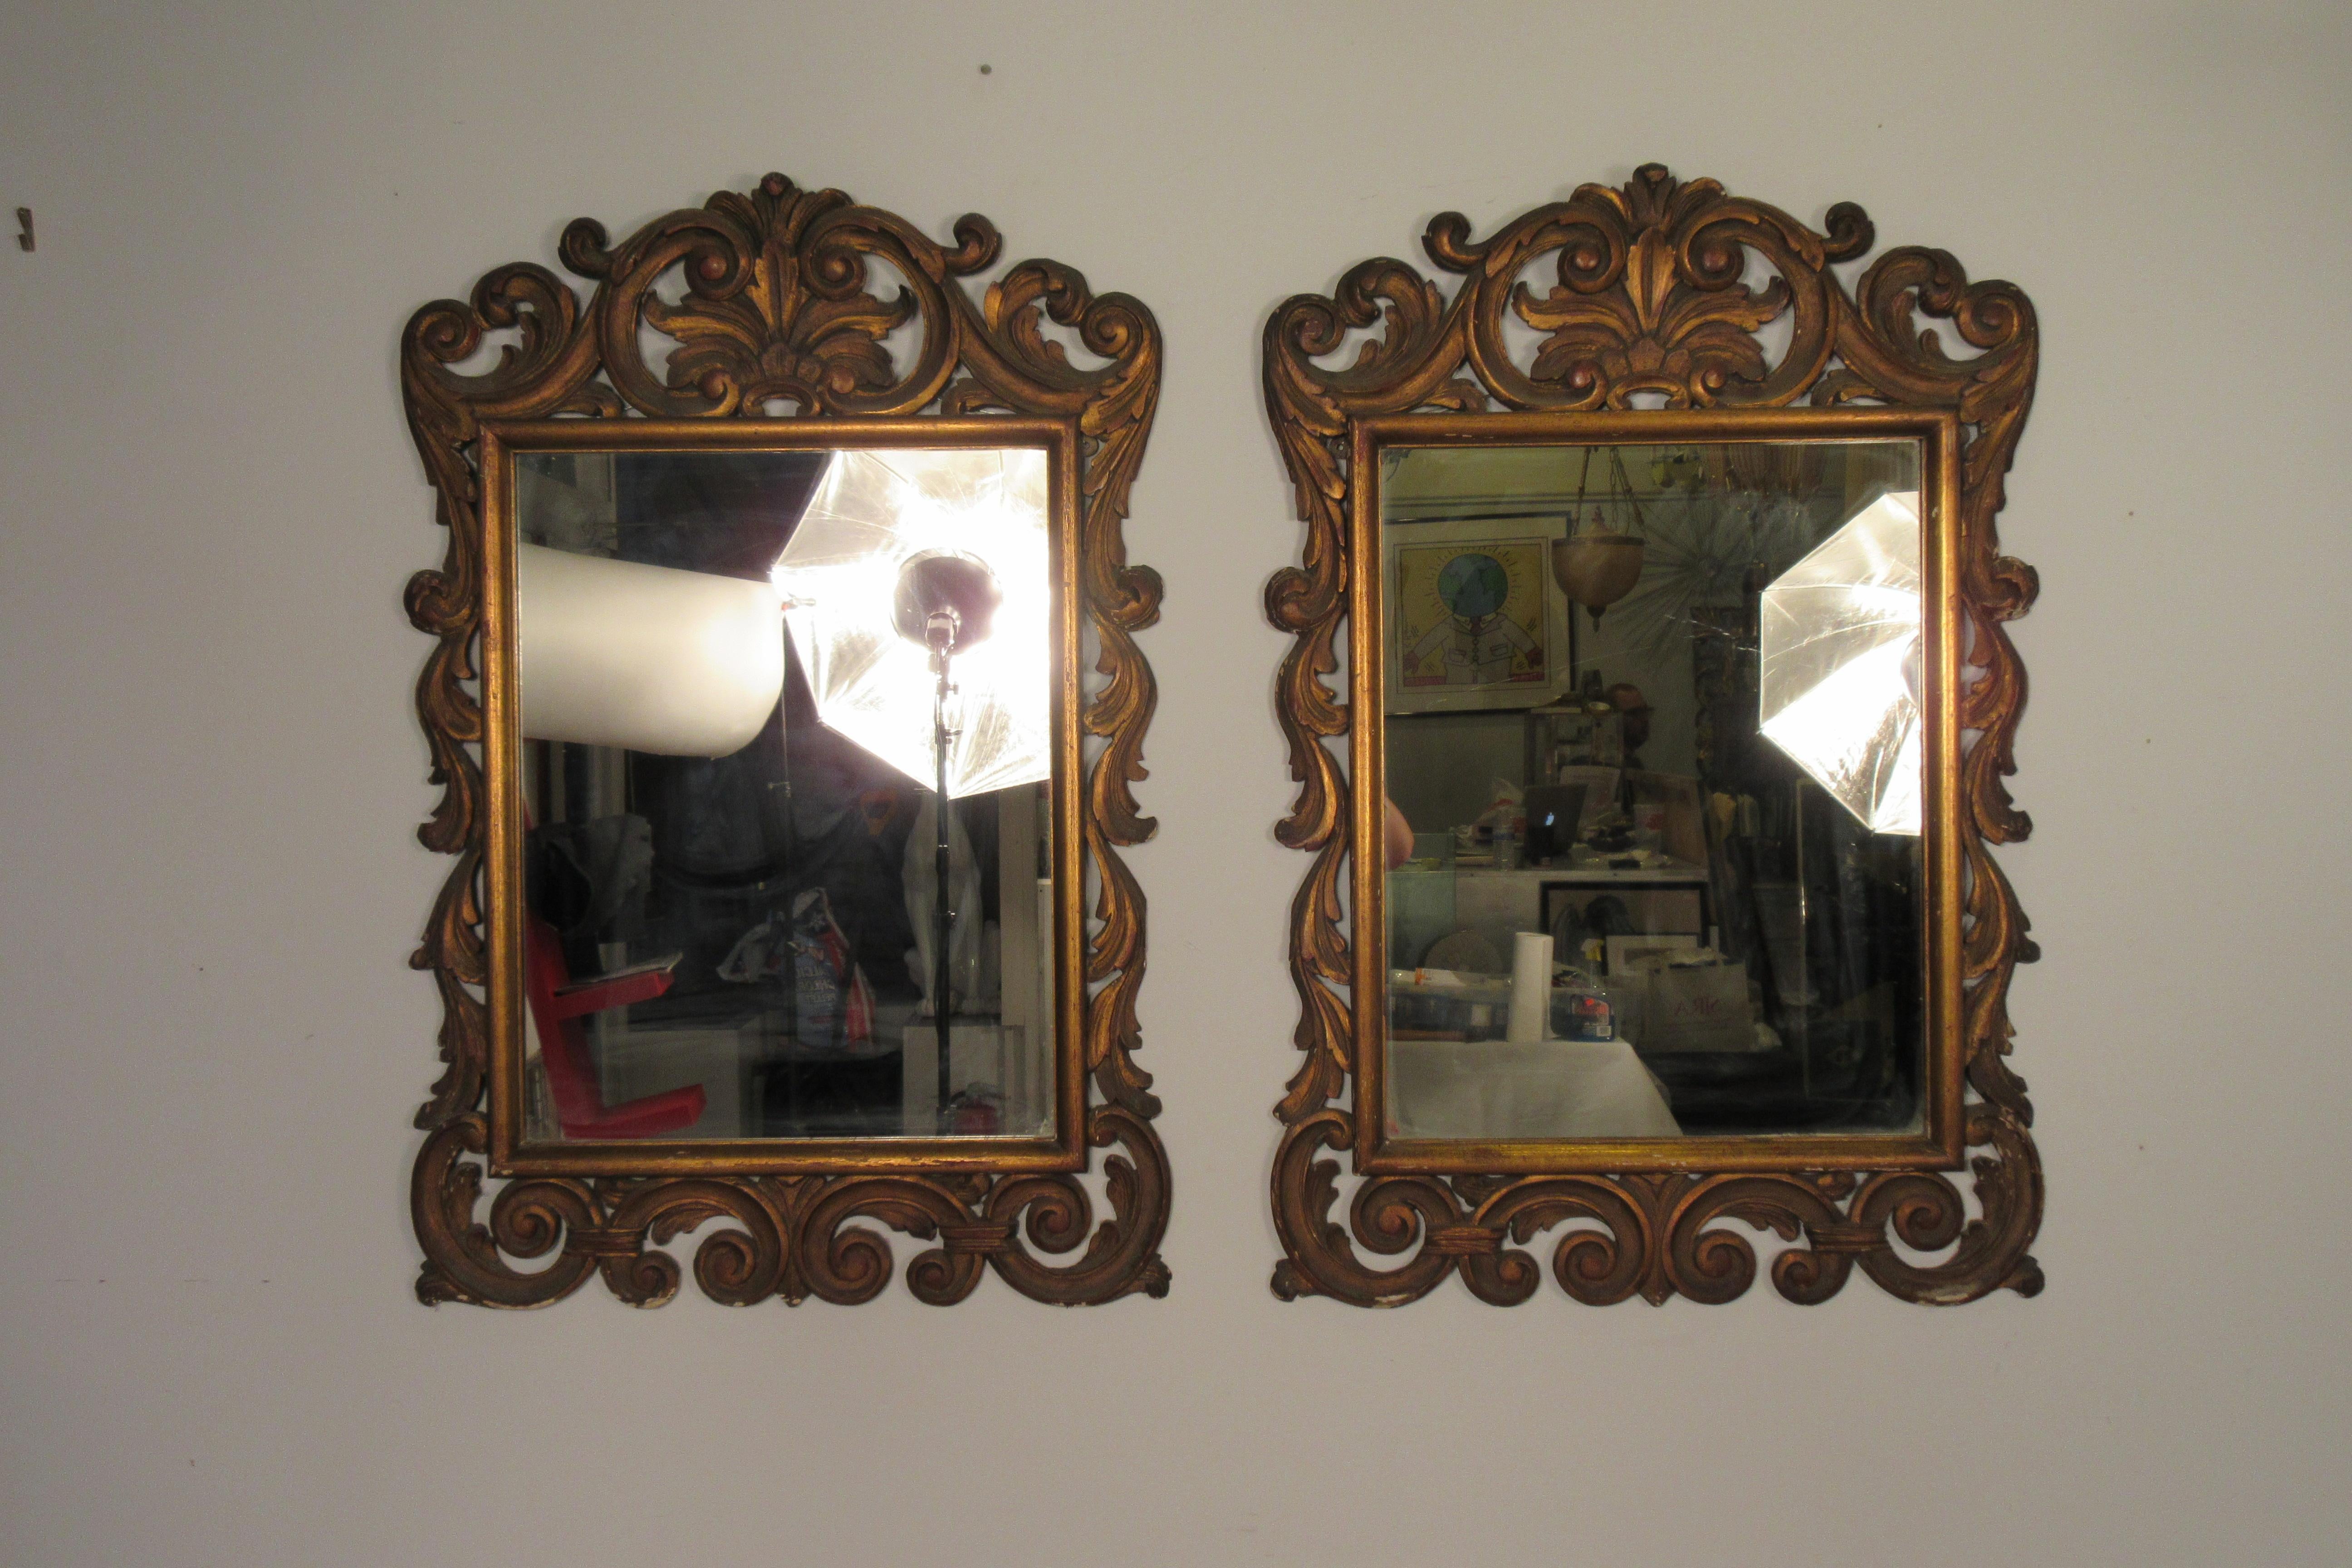 Pair of 1960s carved wood Italian mirrors. There are a total of 3 mirrors. I’m selling one pair, and one single.